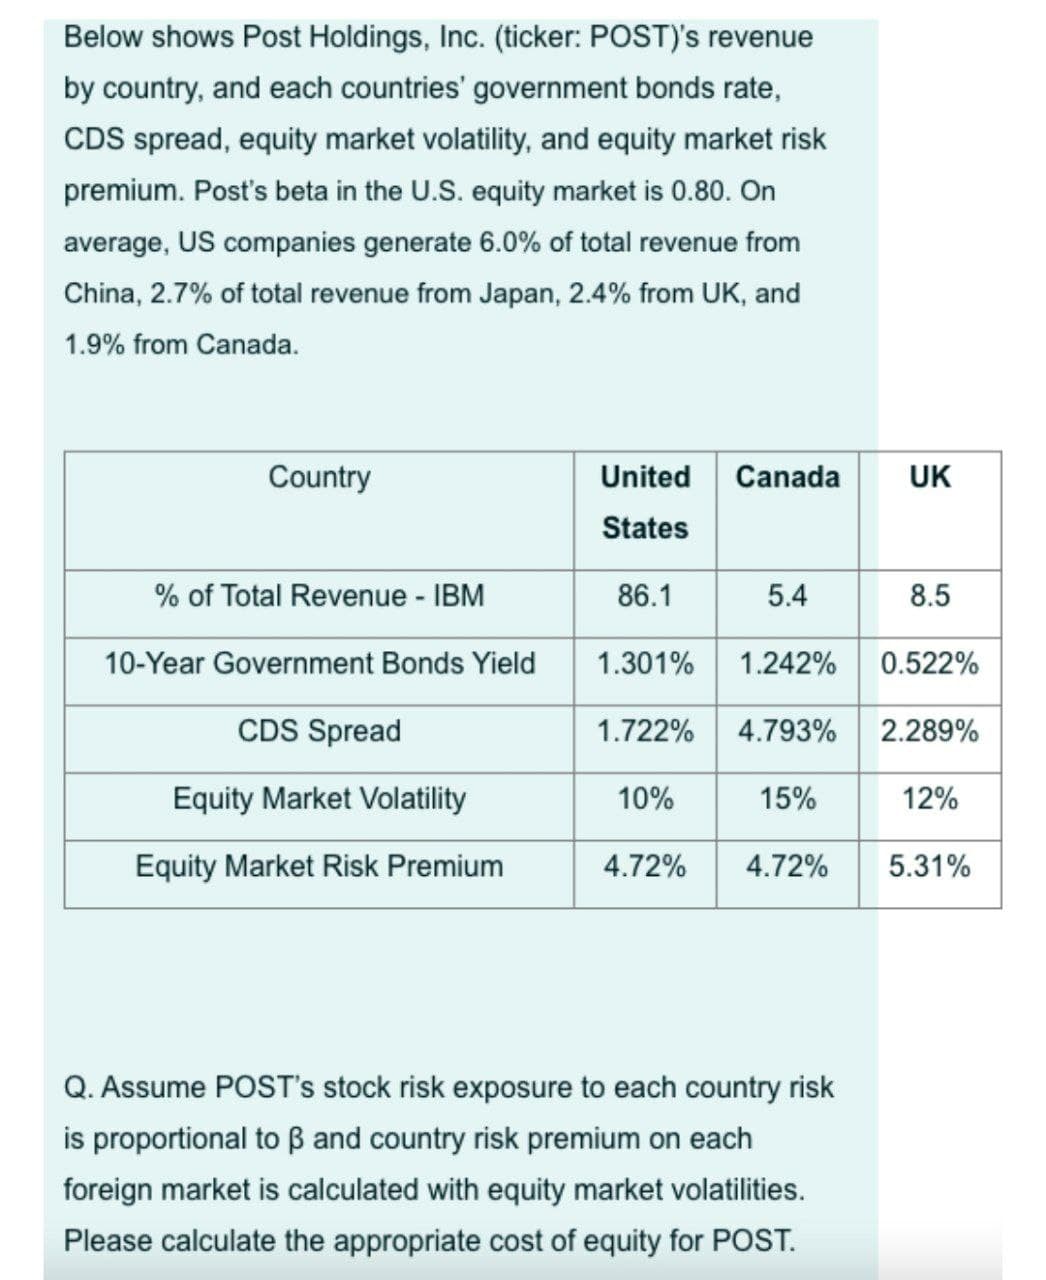 Below shows Post Holdings, Inc. (ticker: POST)'s revenue
by country, and each countries' government bonds rate,
CDS spread, equity market volatility, and equity market risk
premium. Post's beta in the U.S. equity market is 0.80. On
average, US companies generate 6.0% of total revenue from
China, 2.7% of total revenue from Japan, 2.4% from UK, and
1.9% from Canada.
Country
United
Canada
UK
States
% of Total Revenue - IBM
86.1
5.4
8.5
10-Year Government Bonds Yield
1.301% 1.242%
0.522%
CDS Spread
1.722%
4.793%
2.289%
Equity Market Volatility
10%
15%
12%
Equity Market Risk Premium
4.72%
4.72%
5.31%
Q. Assume POST's stock risk exposure to each country risk
is proportional to B and country risk premium on each
foreign market is calculated with equity market volatilities.
Please calculate the appropriate cost of equity for POST.
